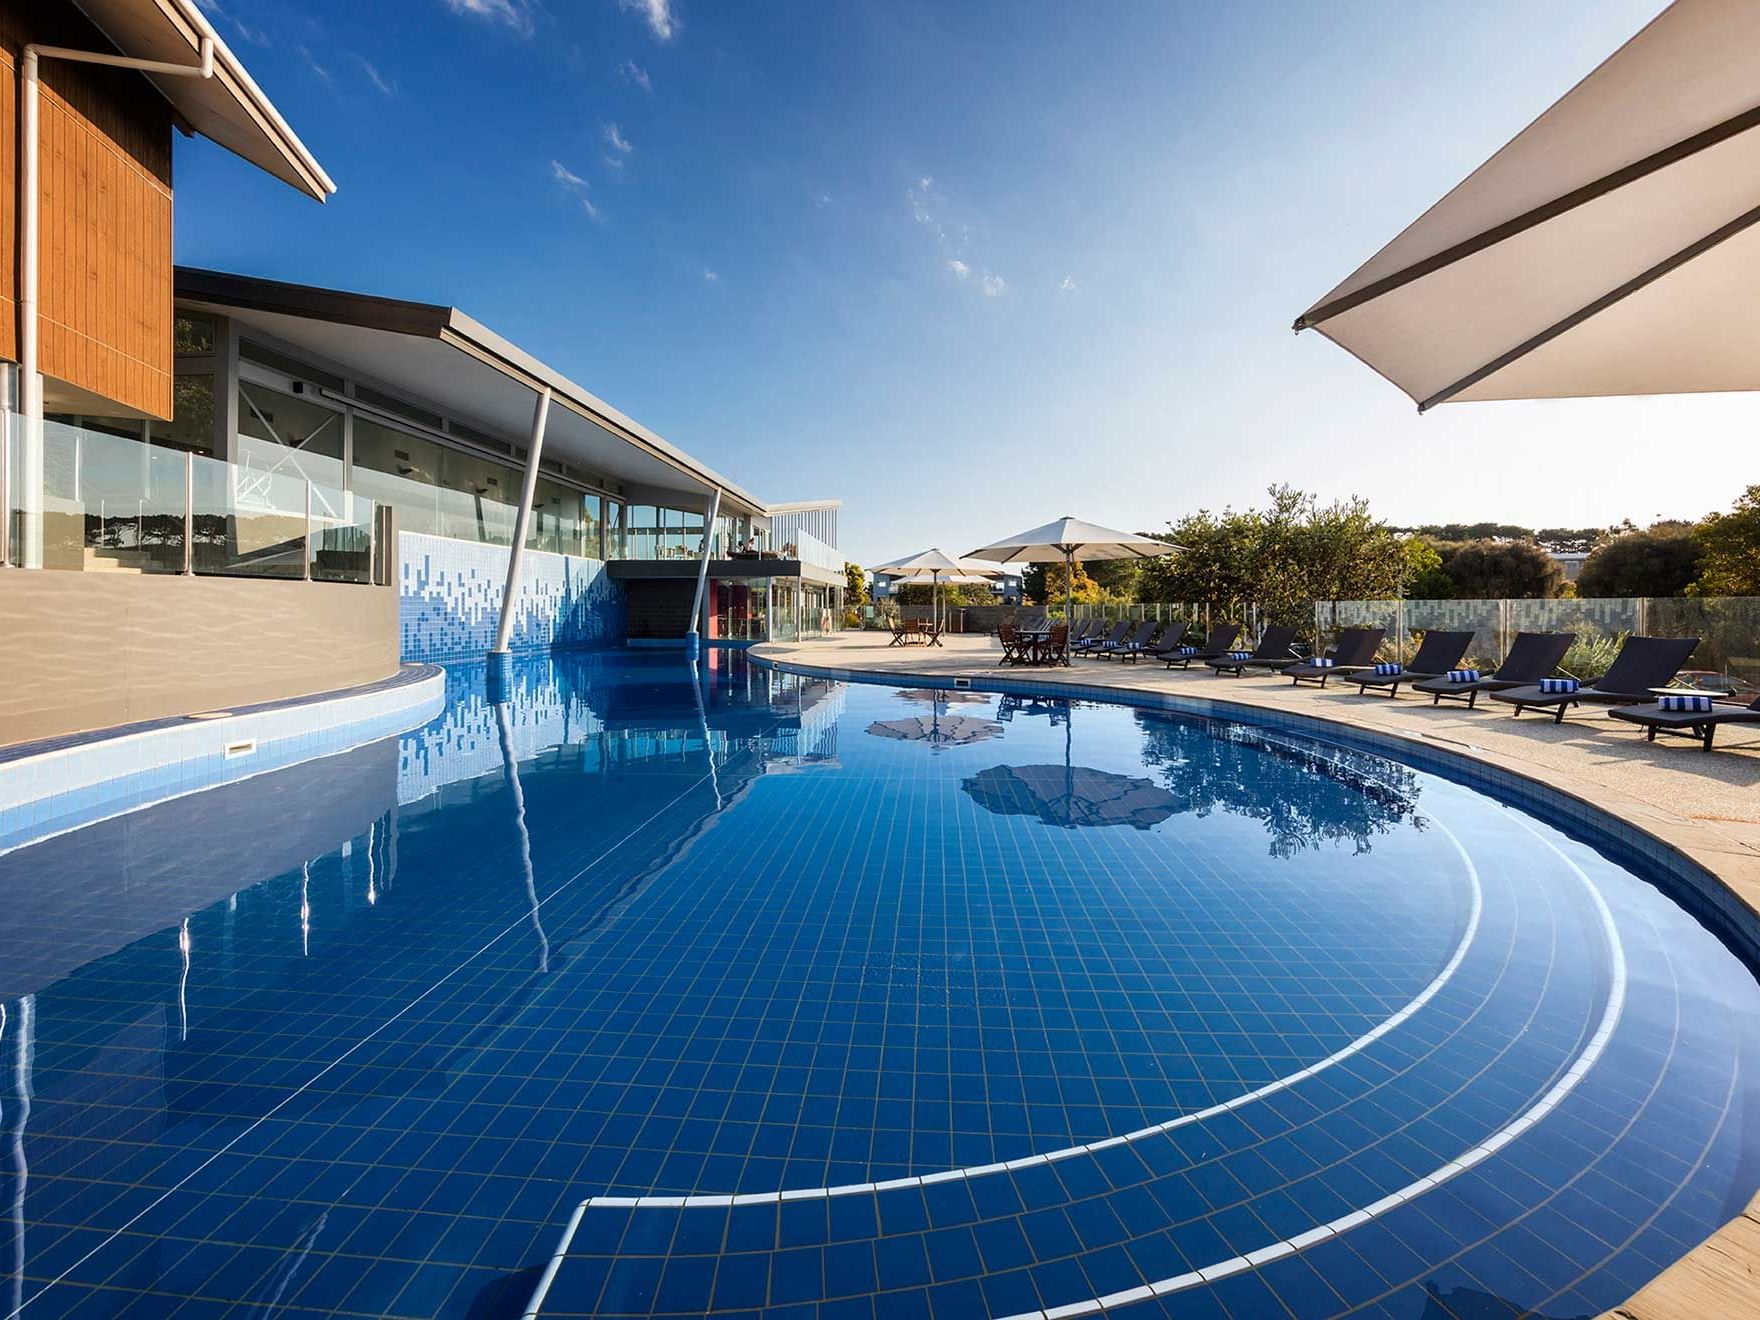 The solar-heated freeform outdoor pool at Silverwater Resort